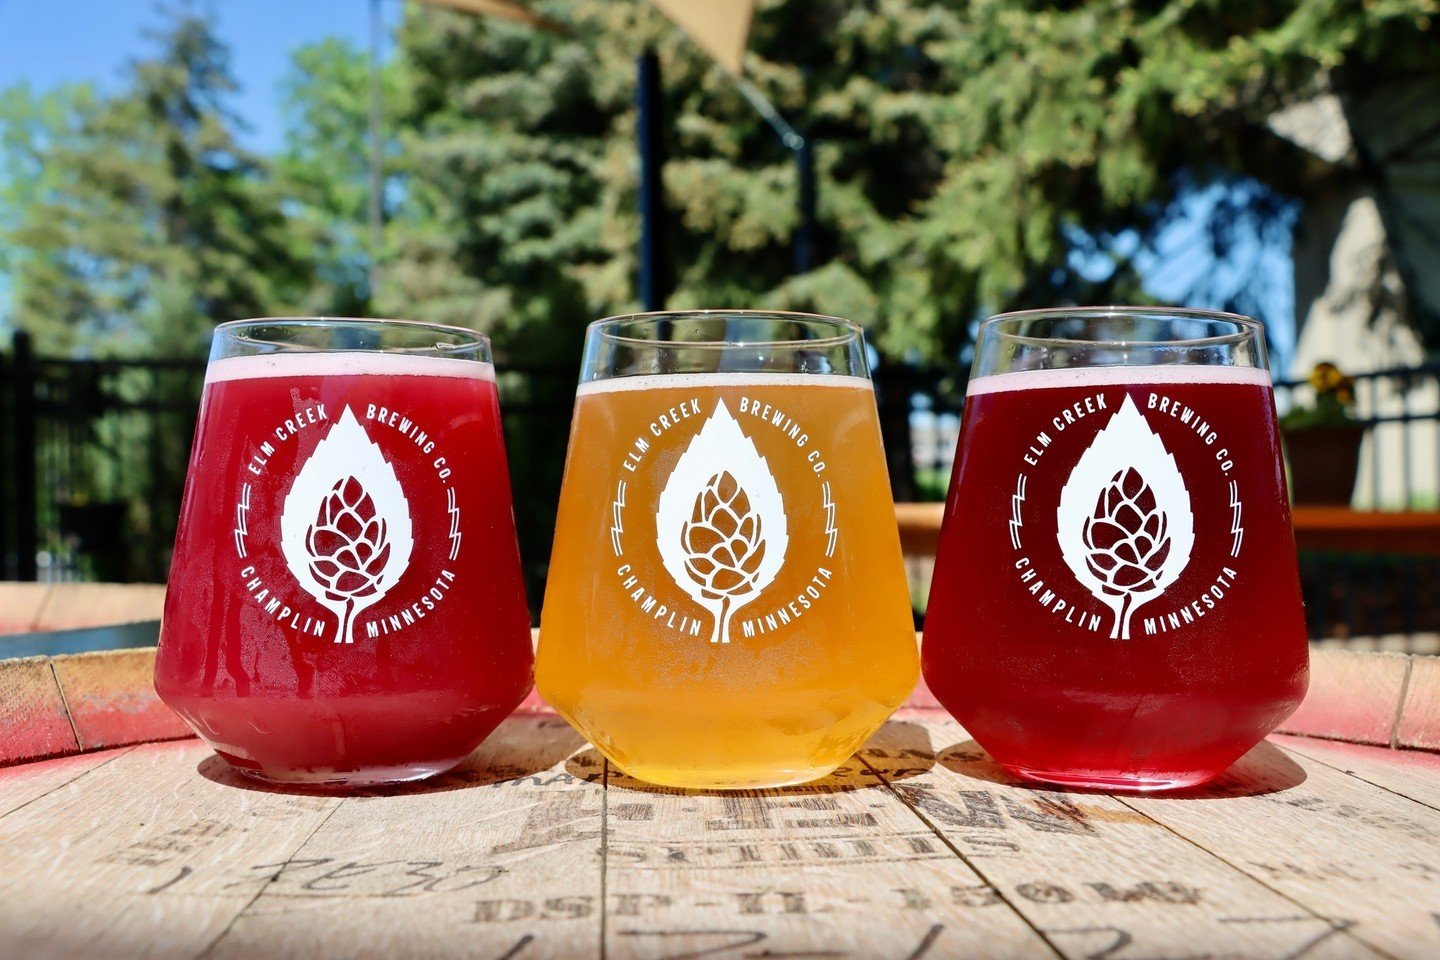 💎 It's a Rare Candy kind of day ⁠
⁠
Lucky for you, we've got THREE on tap right now:⁠
⁠
Blueberry + Raspberry⁠
Peach + Mango + Watermelon⁠
Watermelon + Lime + Hibiscus ⁠
⁠
🤩  Who's sipping the lineup this weekend?! ⁠
⁠
⁠
⁠
⁠
⁠
#elmcreekbrewing #mnc